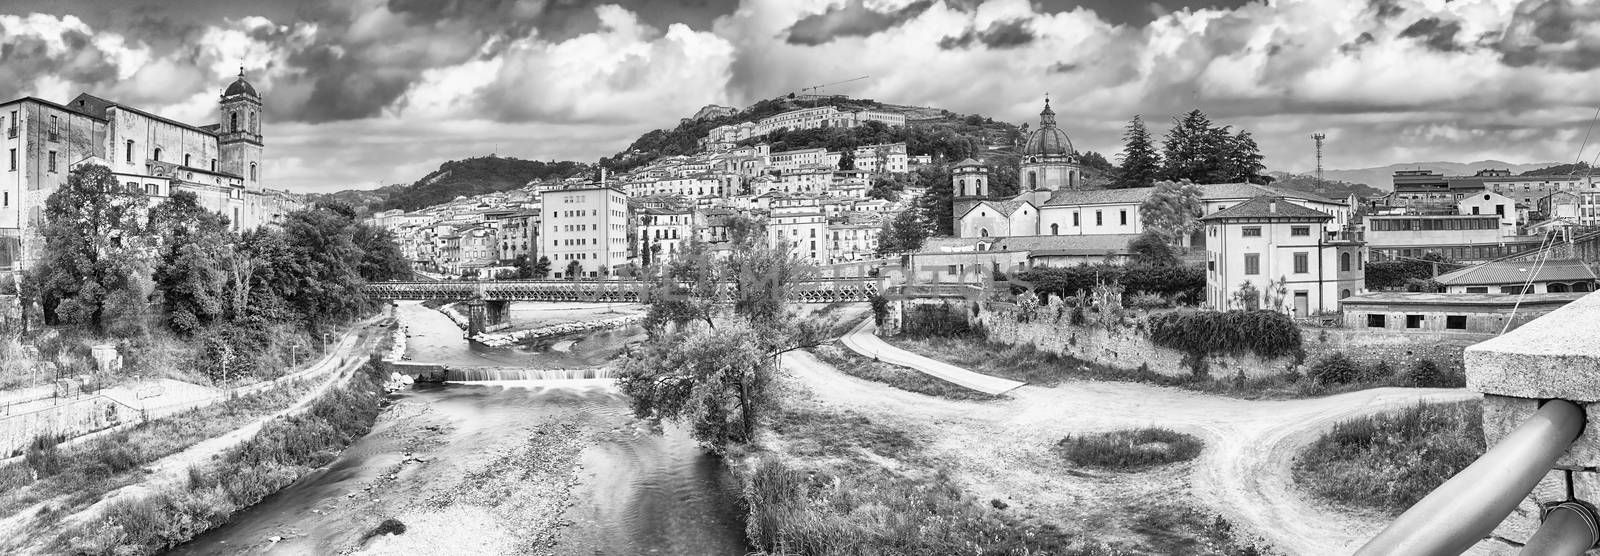 Scenic view of the Old Town in Cosenza, Italy by marcorubino